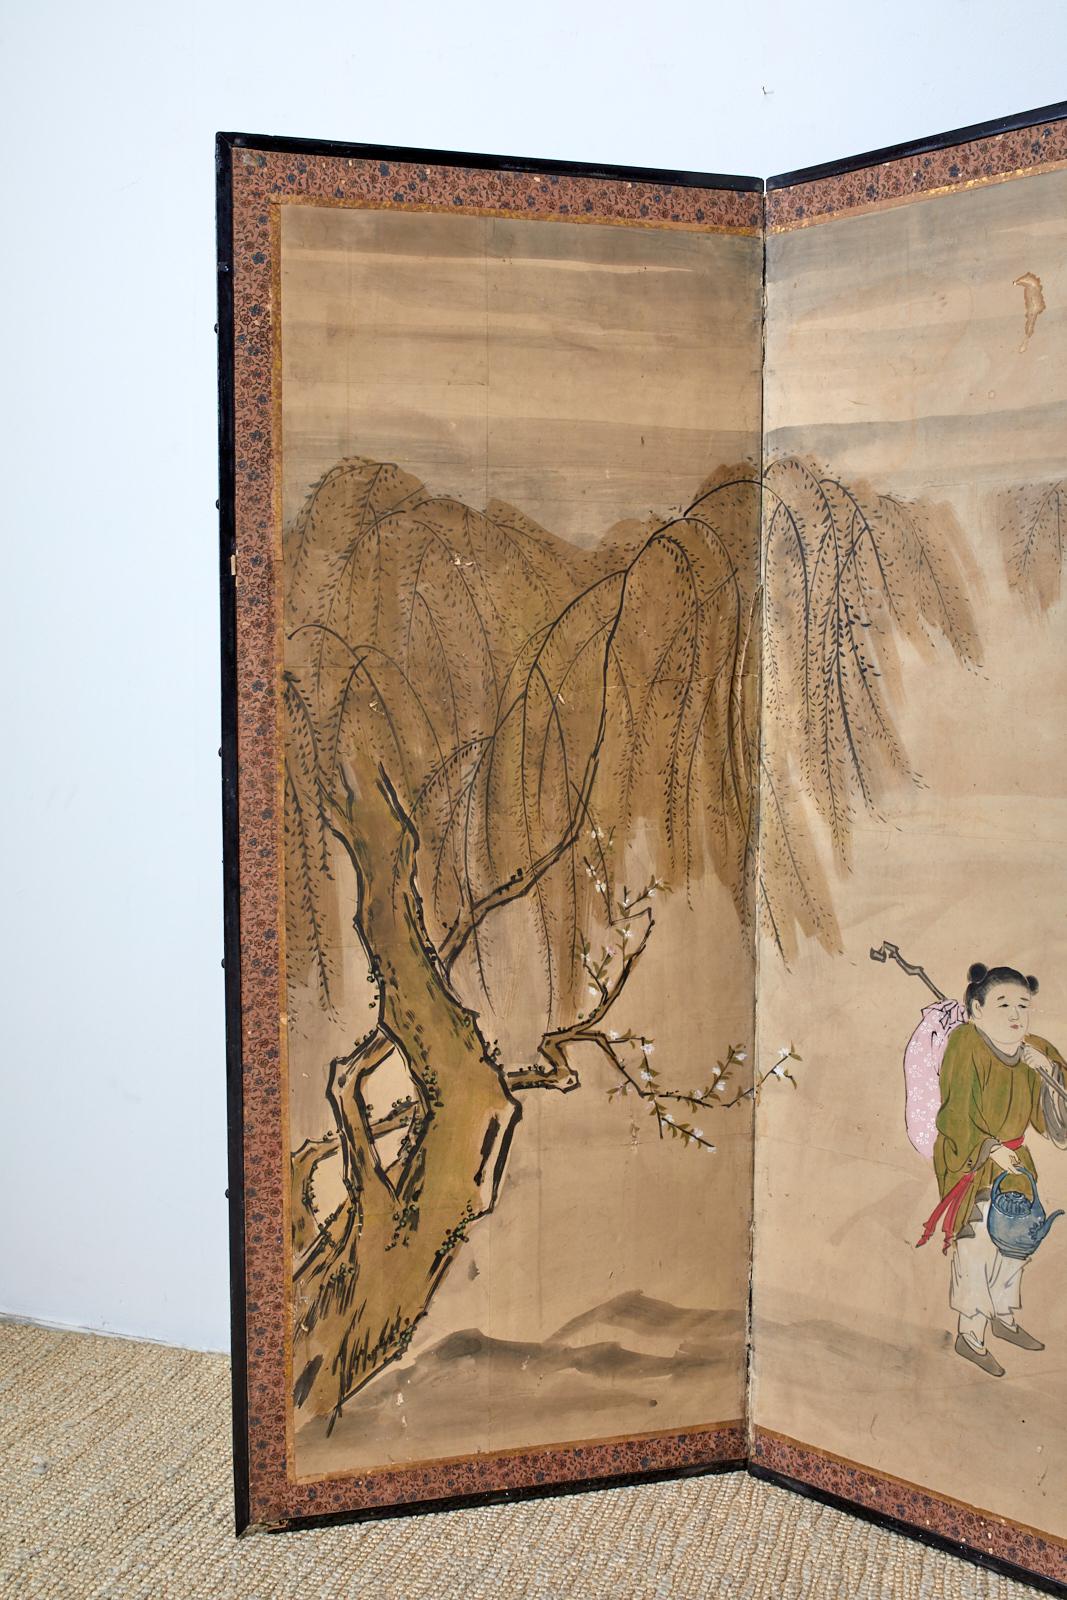 Large 19th century late Meiji period Japanese six-panel painted screen. Depicting a scholar and travelers encountering a Chinese sage riding a donkey. Inscribed with a cursive script poem in the middle. Beautifully faded and aged patina. Ink and